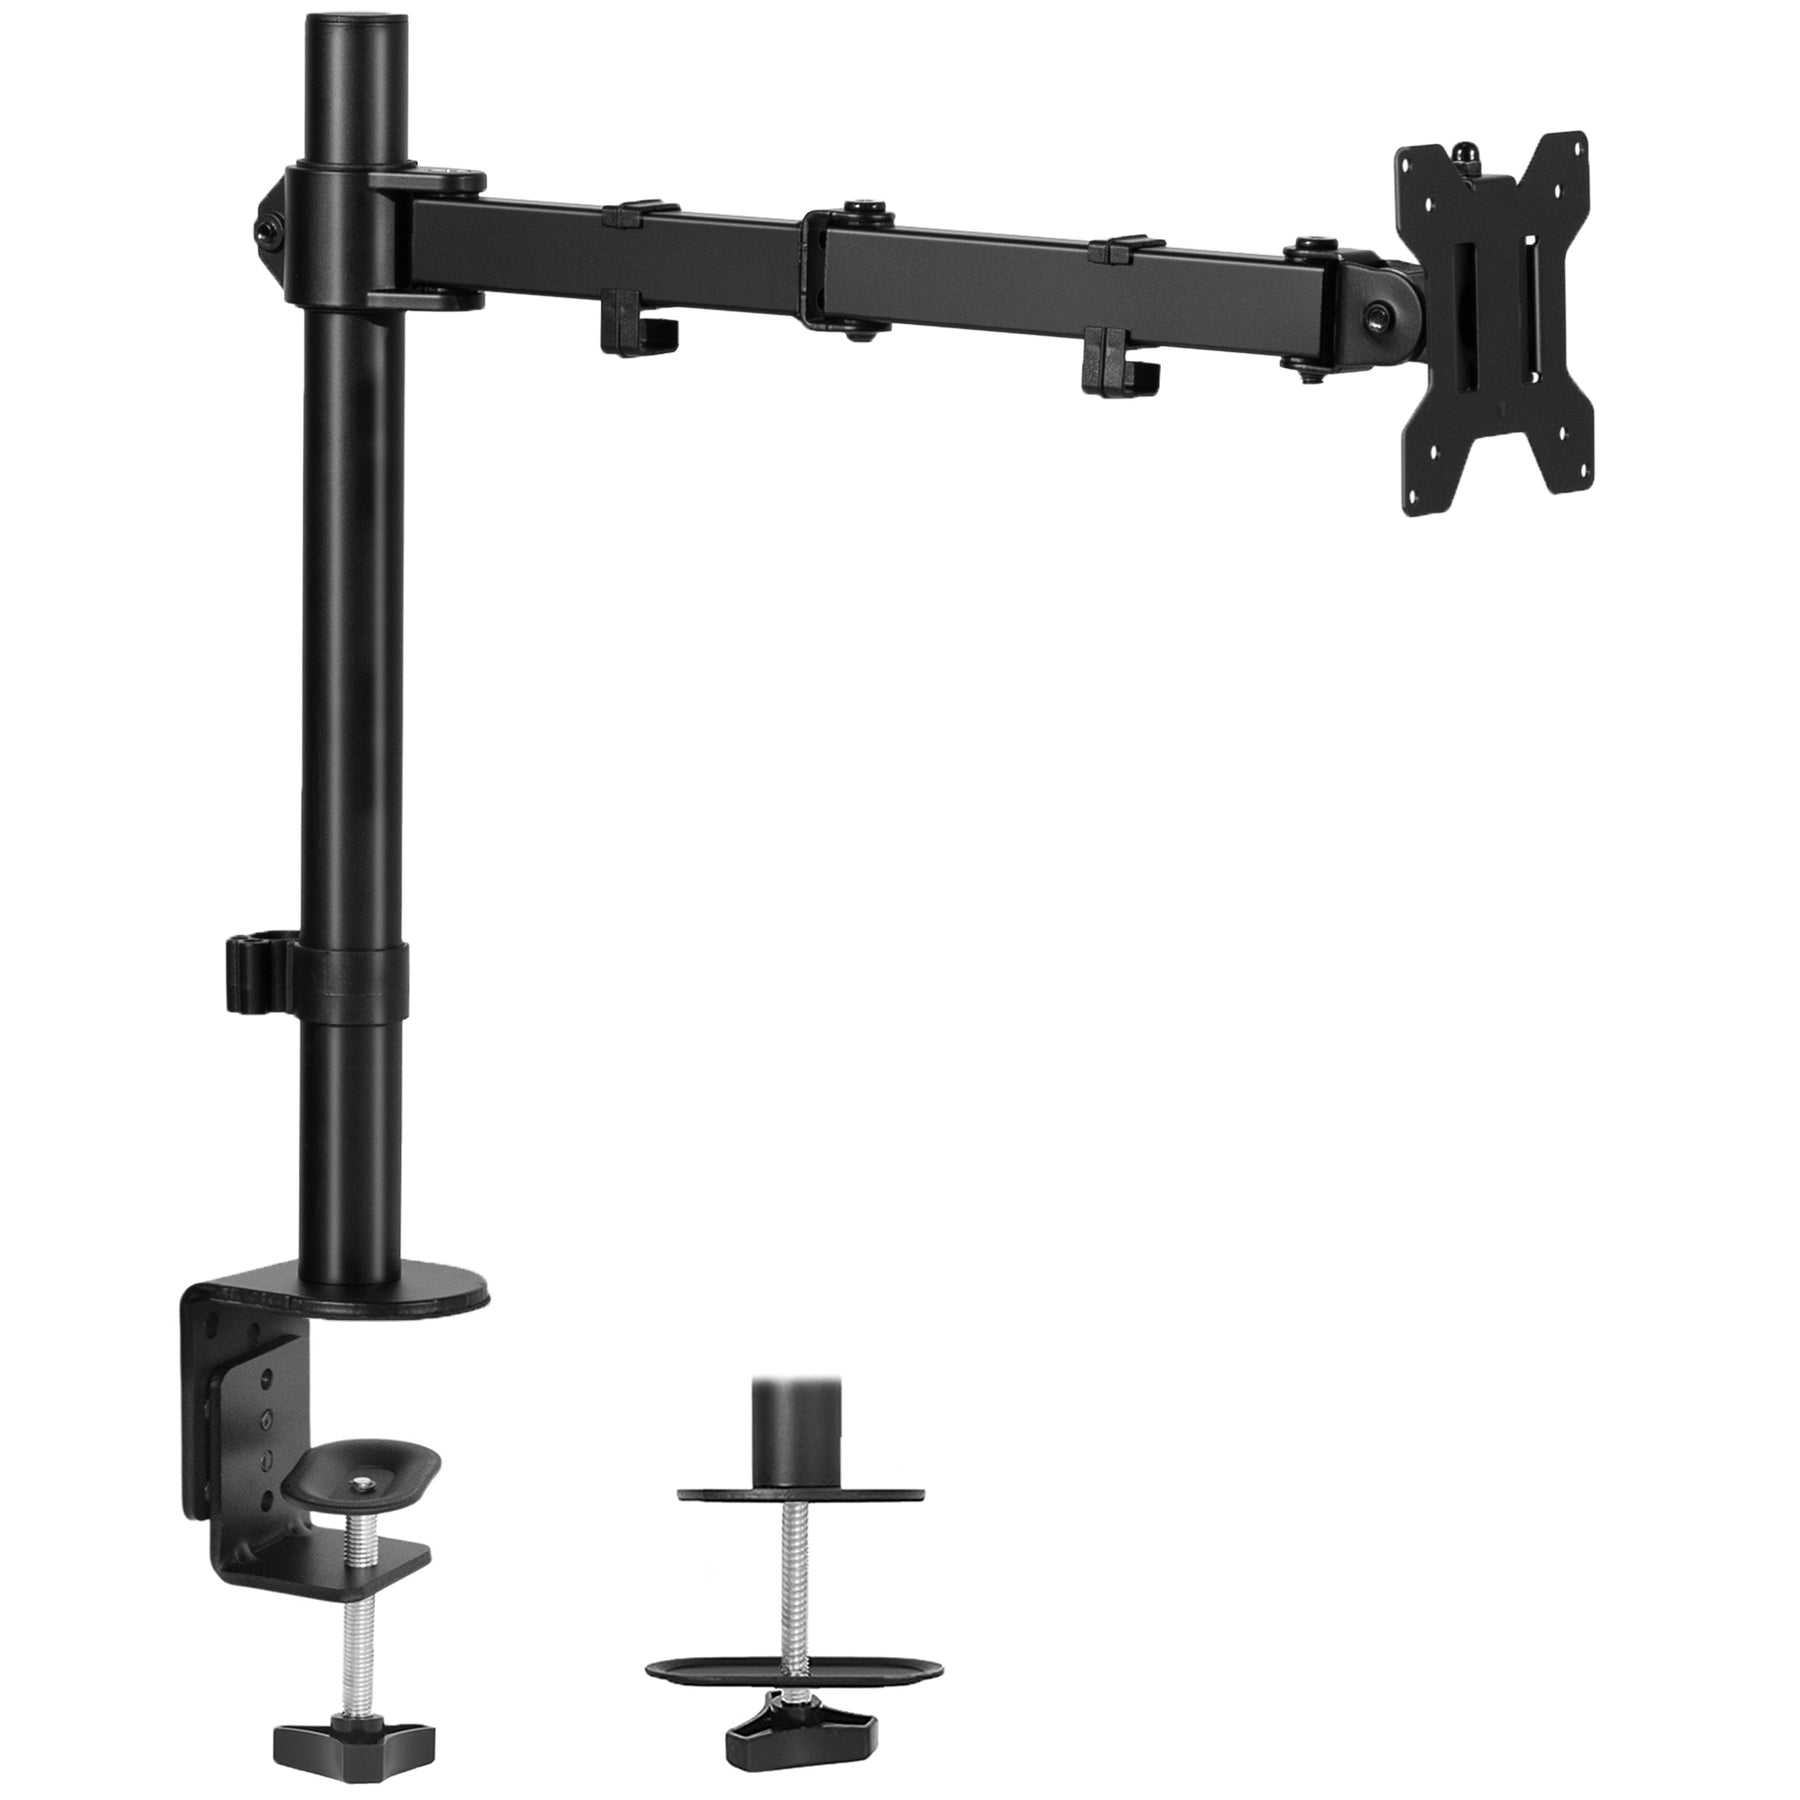 HUANUO Dual Monitor Stand - Ergonomic Adjustable Arm for 13-32 Inch  Monitors, Tilt, Swivel, and Rotate, Weight Capacity up to 20 lbs, VESA